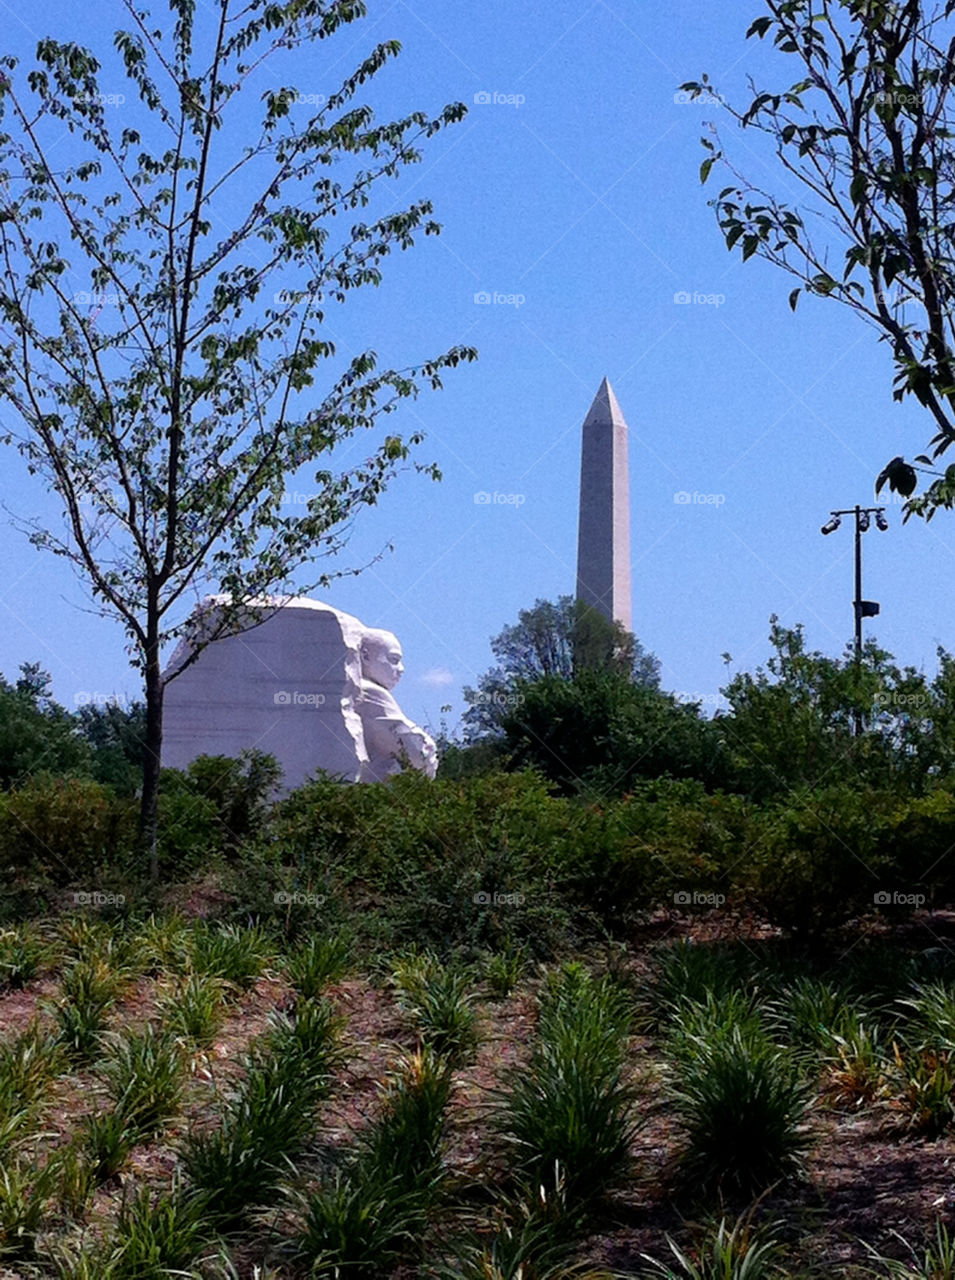 The Washington Monument with the MLK Memorial in the foreground.